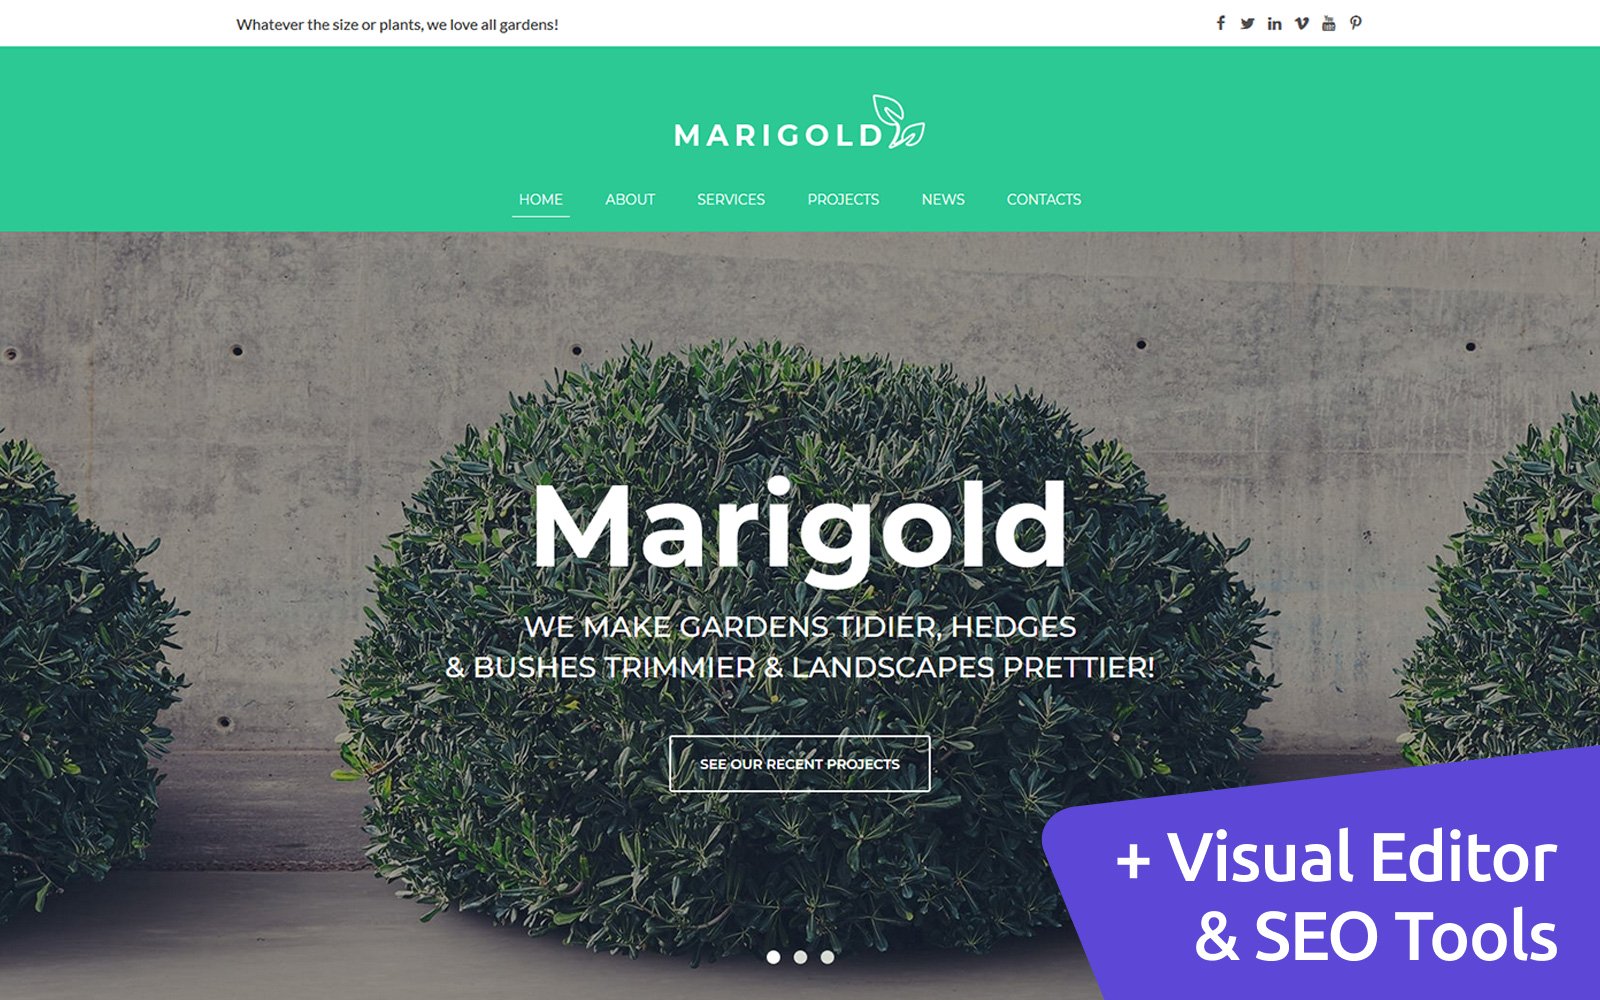 Marigold - Landscaping Services Moto CMS 3 Template